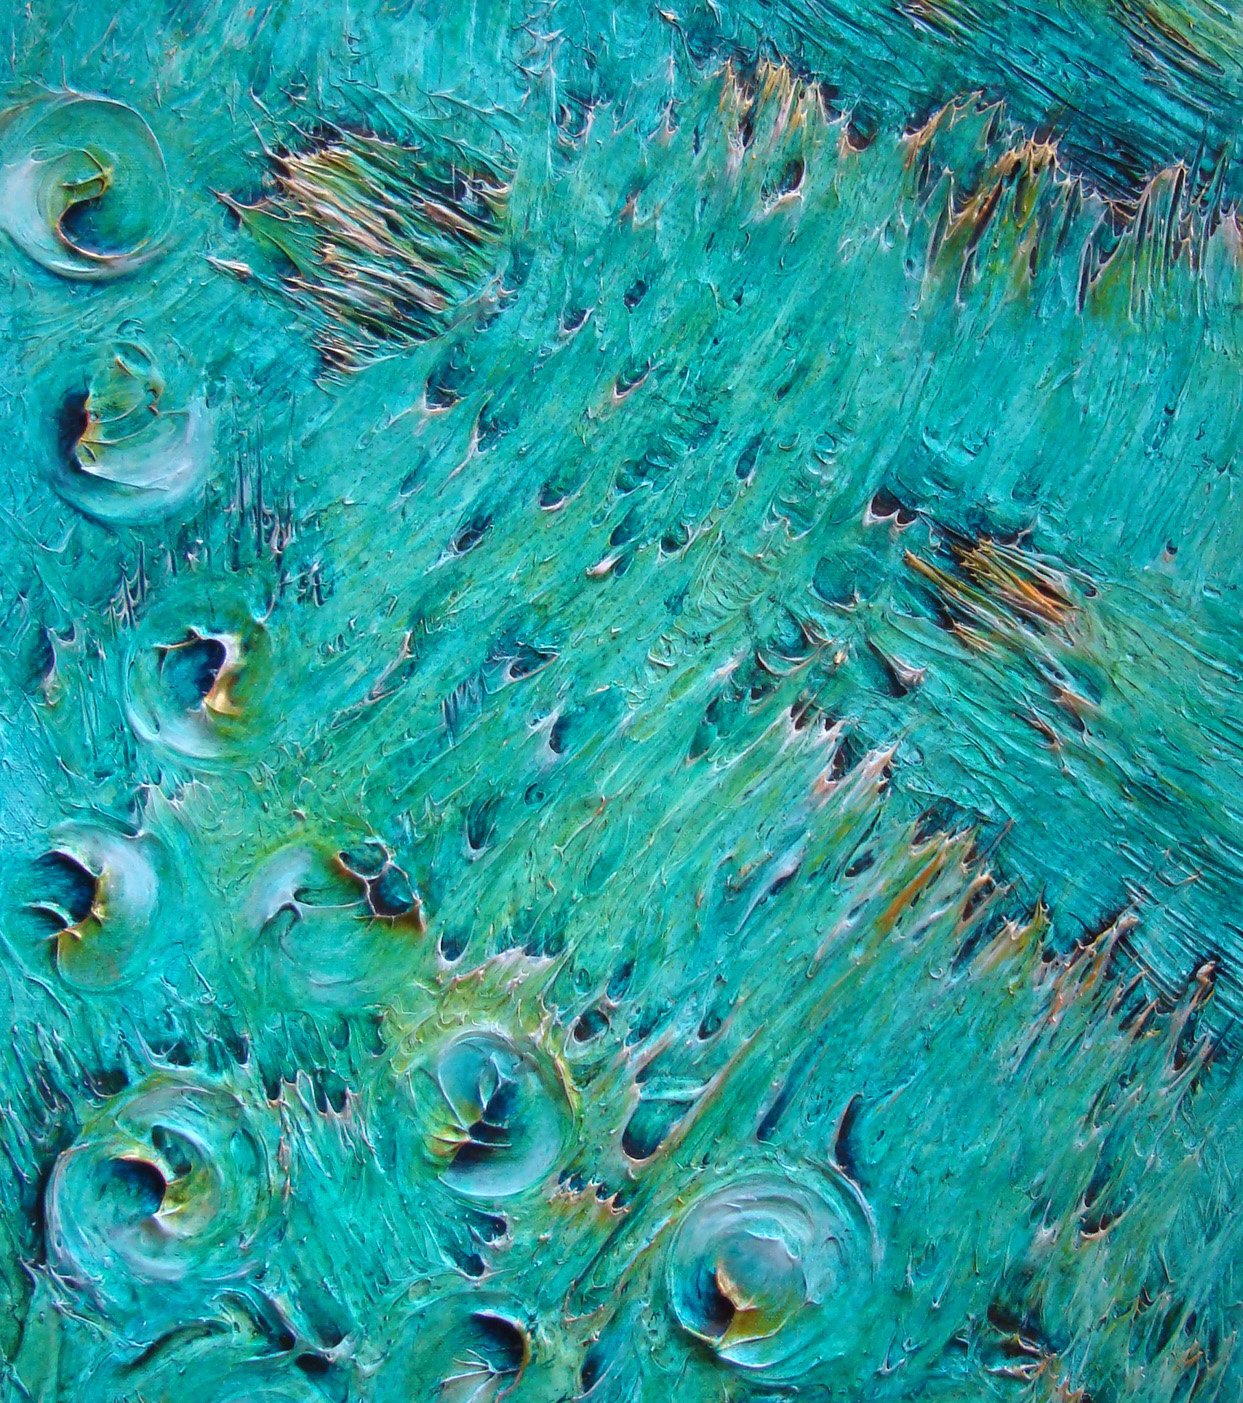   Fugue in D  (Detail), 2010, mixed media on canvas, 36” x 18” 